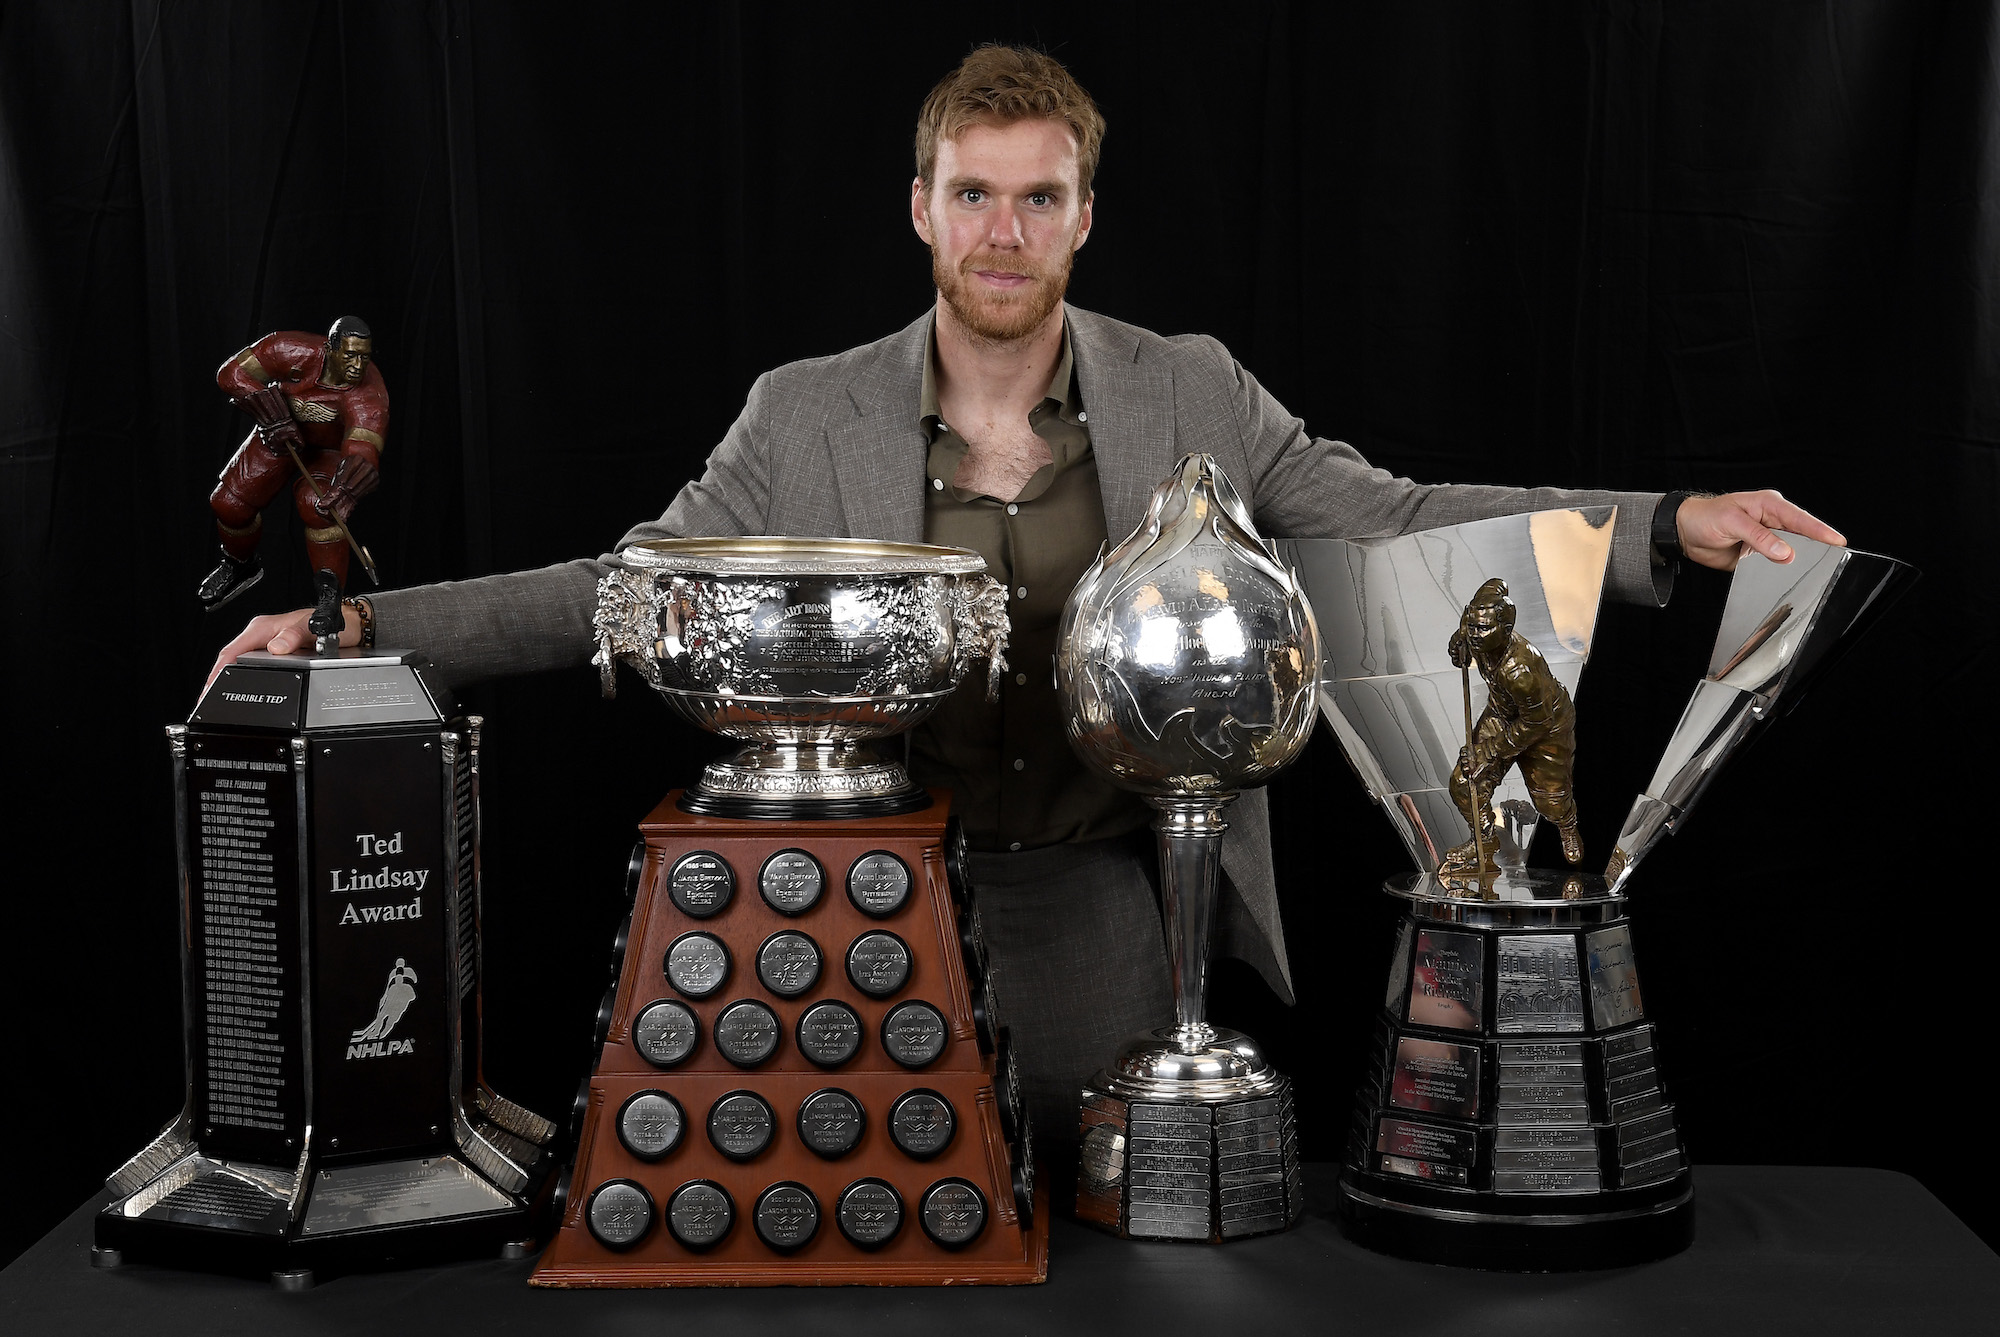 NASHVILLE, TENNESSEE - JUNE 26: Connor McDavid poses with the Ted Lindsay Award, The Art Ross Trophy, Hart Trophy, and Maurice 'Rocket' Richard Trophy at the 2023 NHL Awards at Bridgestone Arena on June 26, 2023 in Nashville, Tennessee. (Photo by Brian Babineau/NHLI via Getty Images)